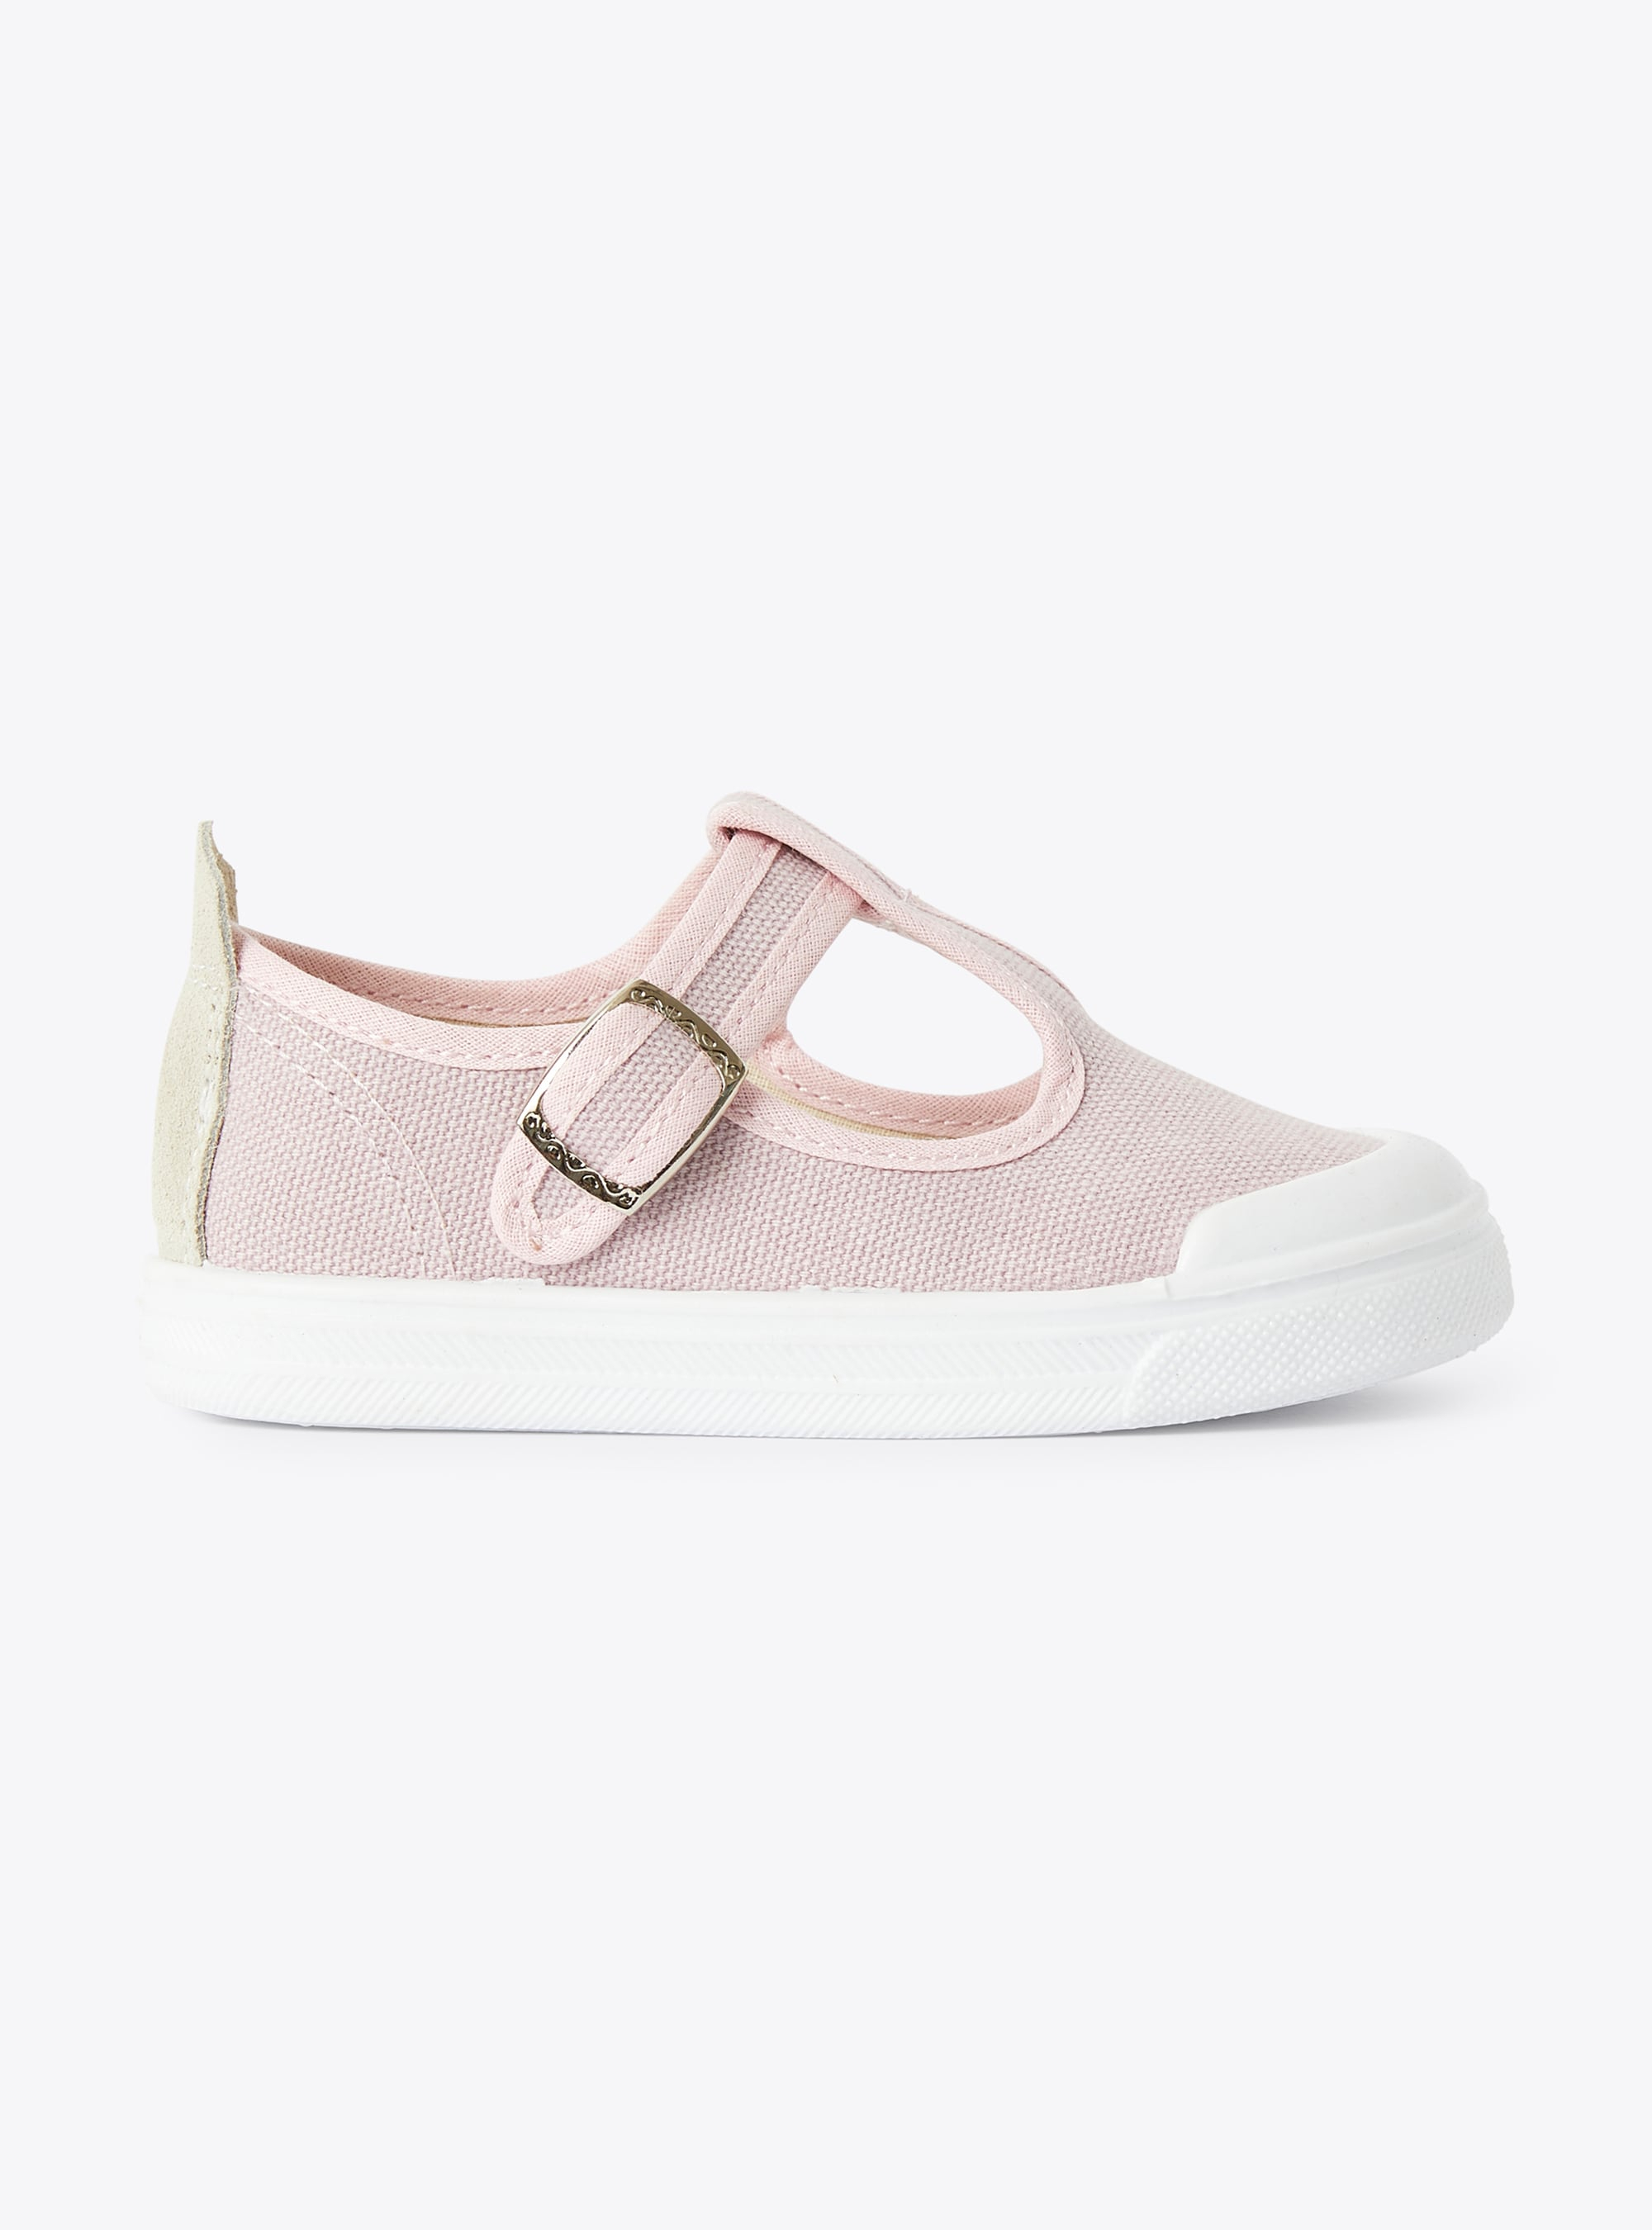 Sandal in canvas with buckle detail - Fuchsia | Il Gufo